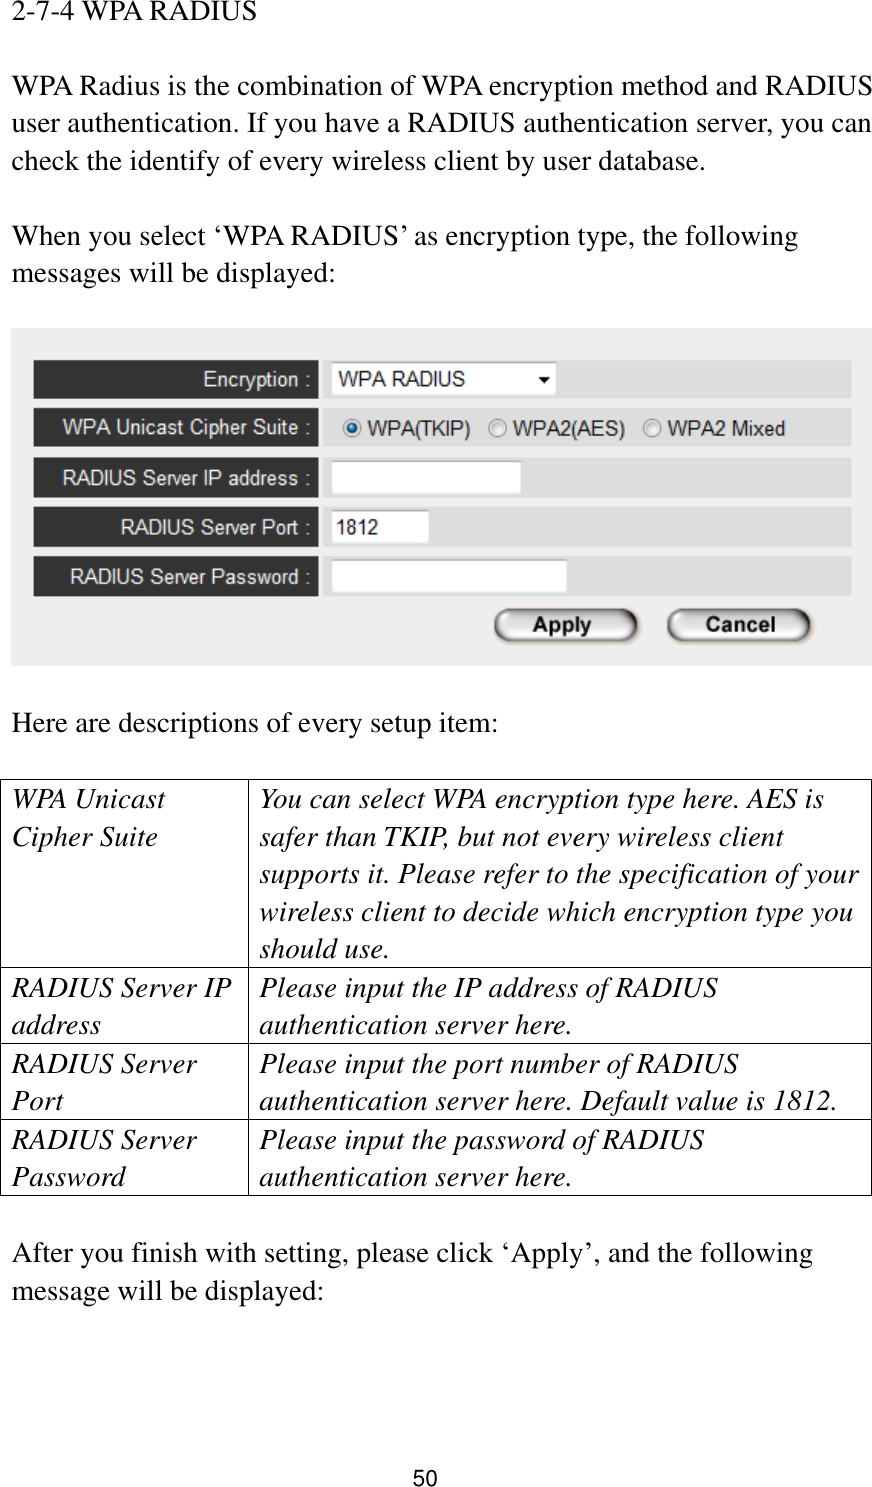 50 2-7-4 WPA RADIUS  WPA Radius is the combination of WPA encryption method and RADIUS user authentication. If you have a RADIUS authentication server, you can check the identify of every wireless client by user database.  When you select „WPA RADIUS‟ as encryption type, the following messages will be displayed:    Here are descriptions of every setup item:  WPA Unicast Cipher Suite You can select WPA encryption type here. AES is safer than TKIP, but not every wireless client supports it. Please refer to the specification of your wireless client to decide which encryption type you should use. RADIUS Server IP address Please input the IP address of RADIUS authentication server here. RADIUS Server Port Please input the port number of RADIUS authentication server here. Default value is 1812. RADIUS Server Password Please input the password of RADIUS authentication server here.  After you finish with setting, please click „Apply‟, and the following message will be displayed:  